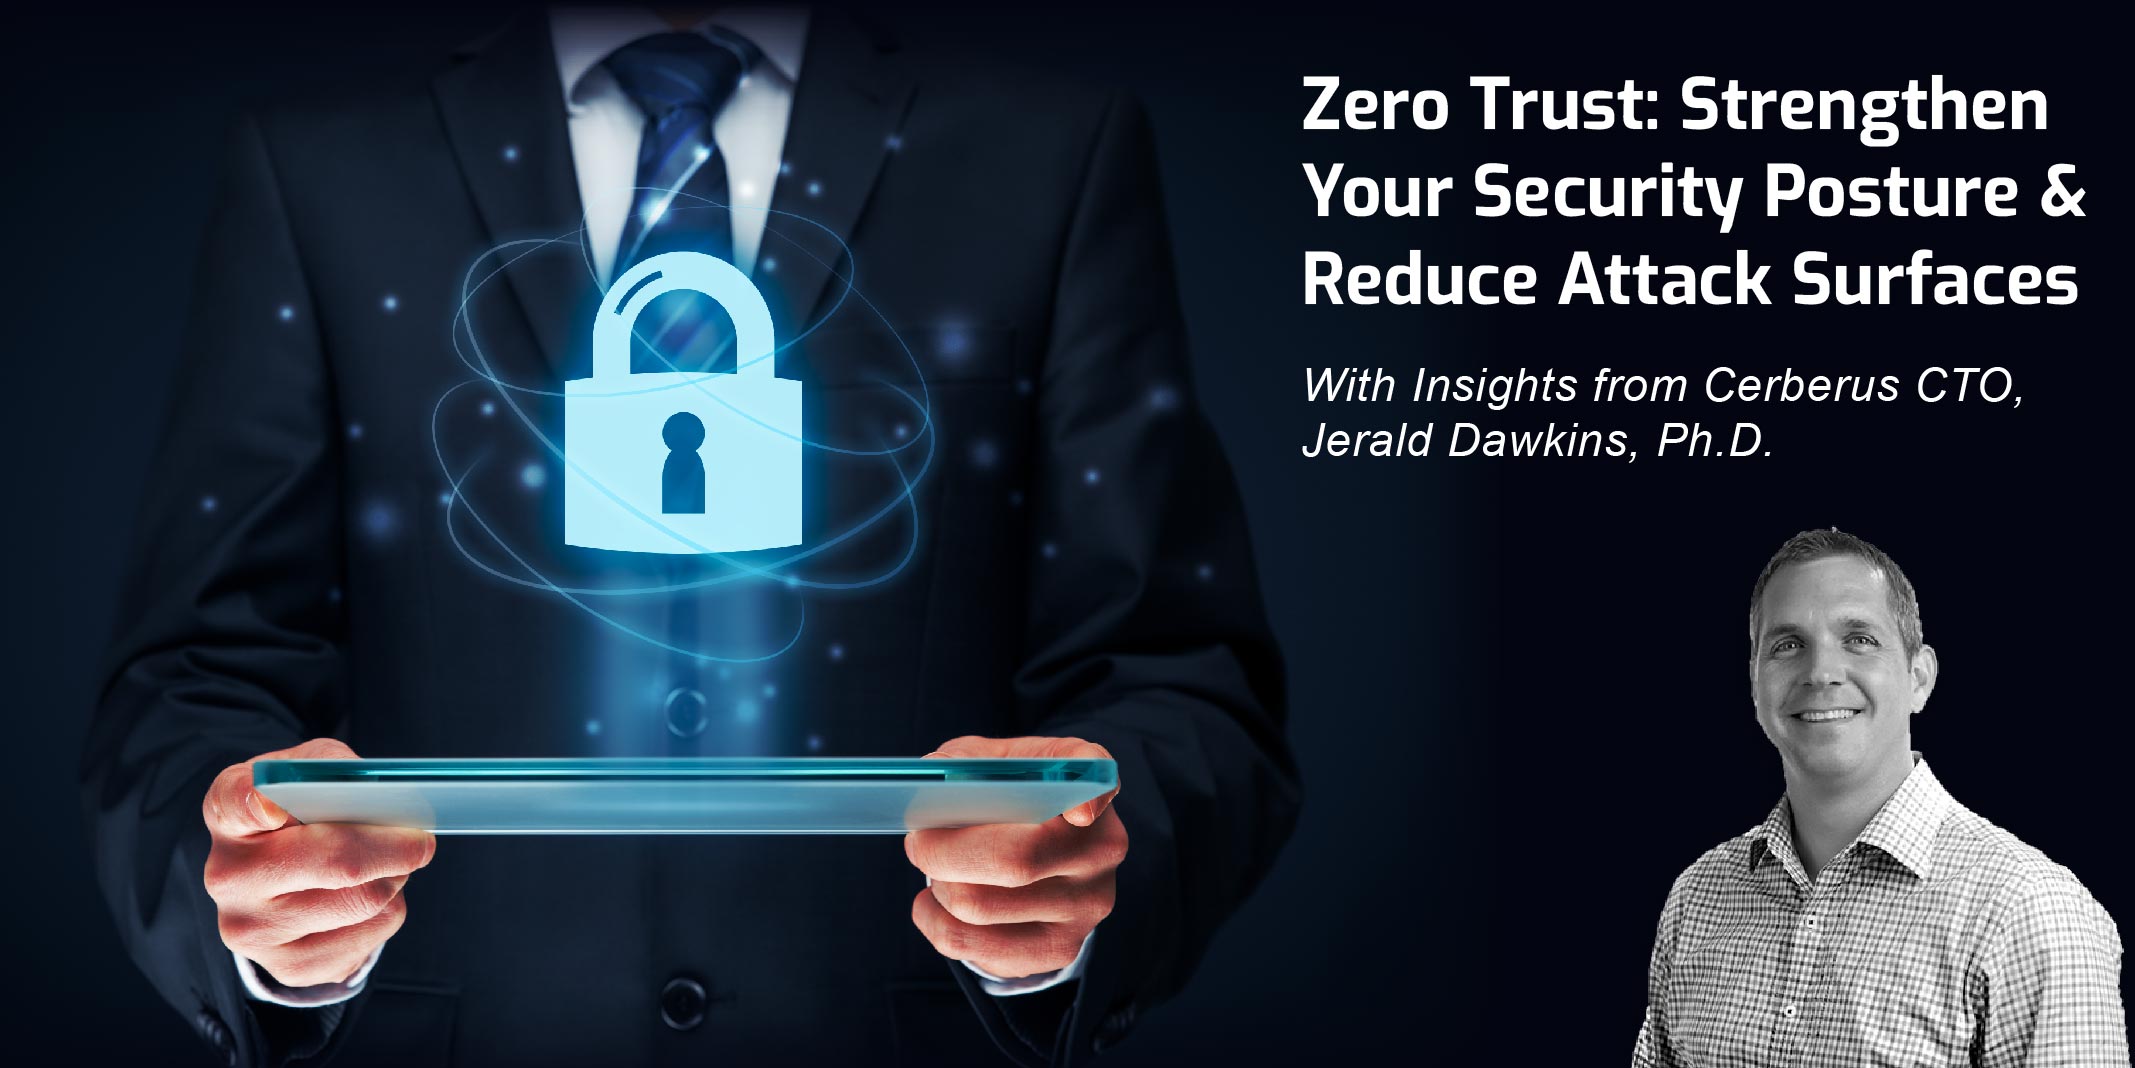 Zero Trust: Strengthen Your Security Posture & Reduce Attack Surfaces